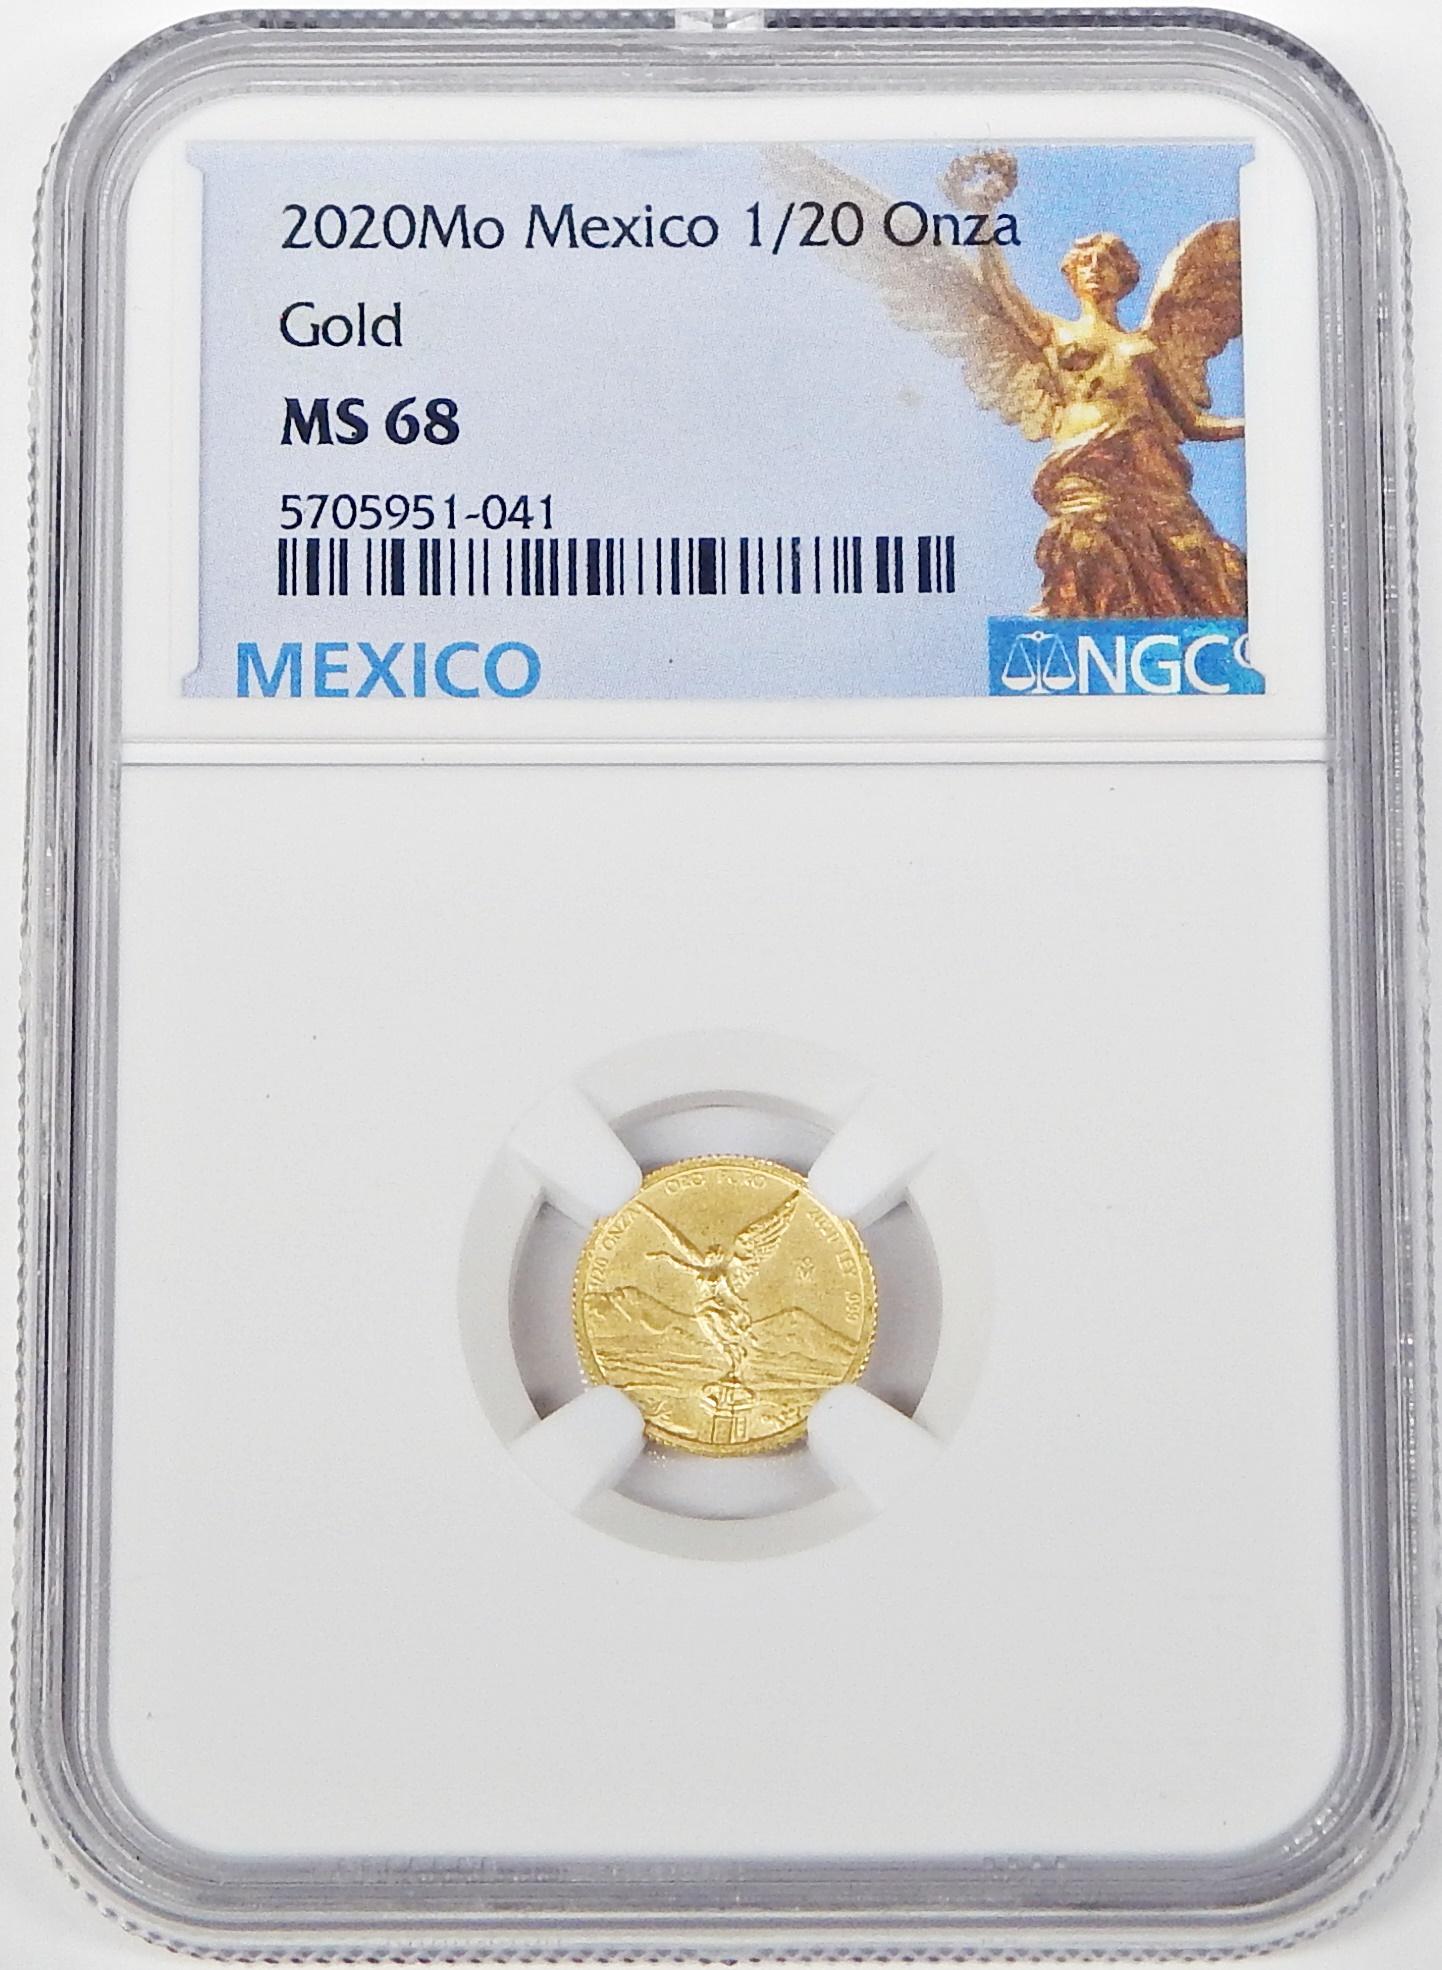 MEXICO - 2020 1/20 OZ GOLD ONZA - NGC MS68 - TINY MINTAGE of 700